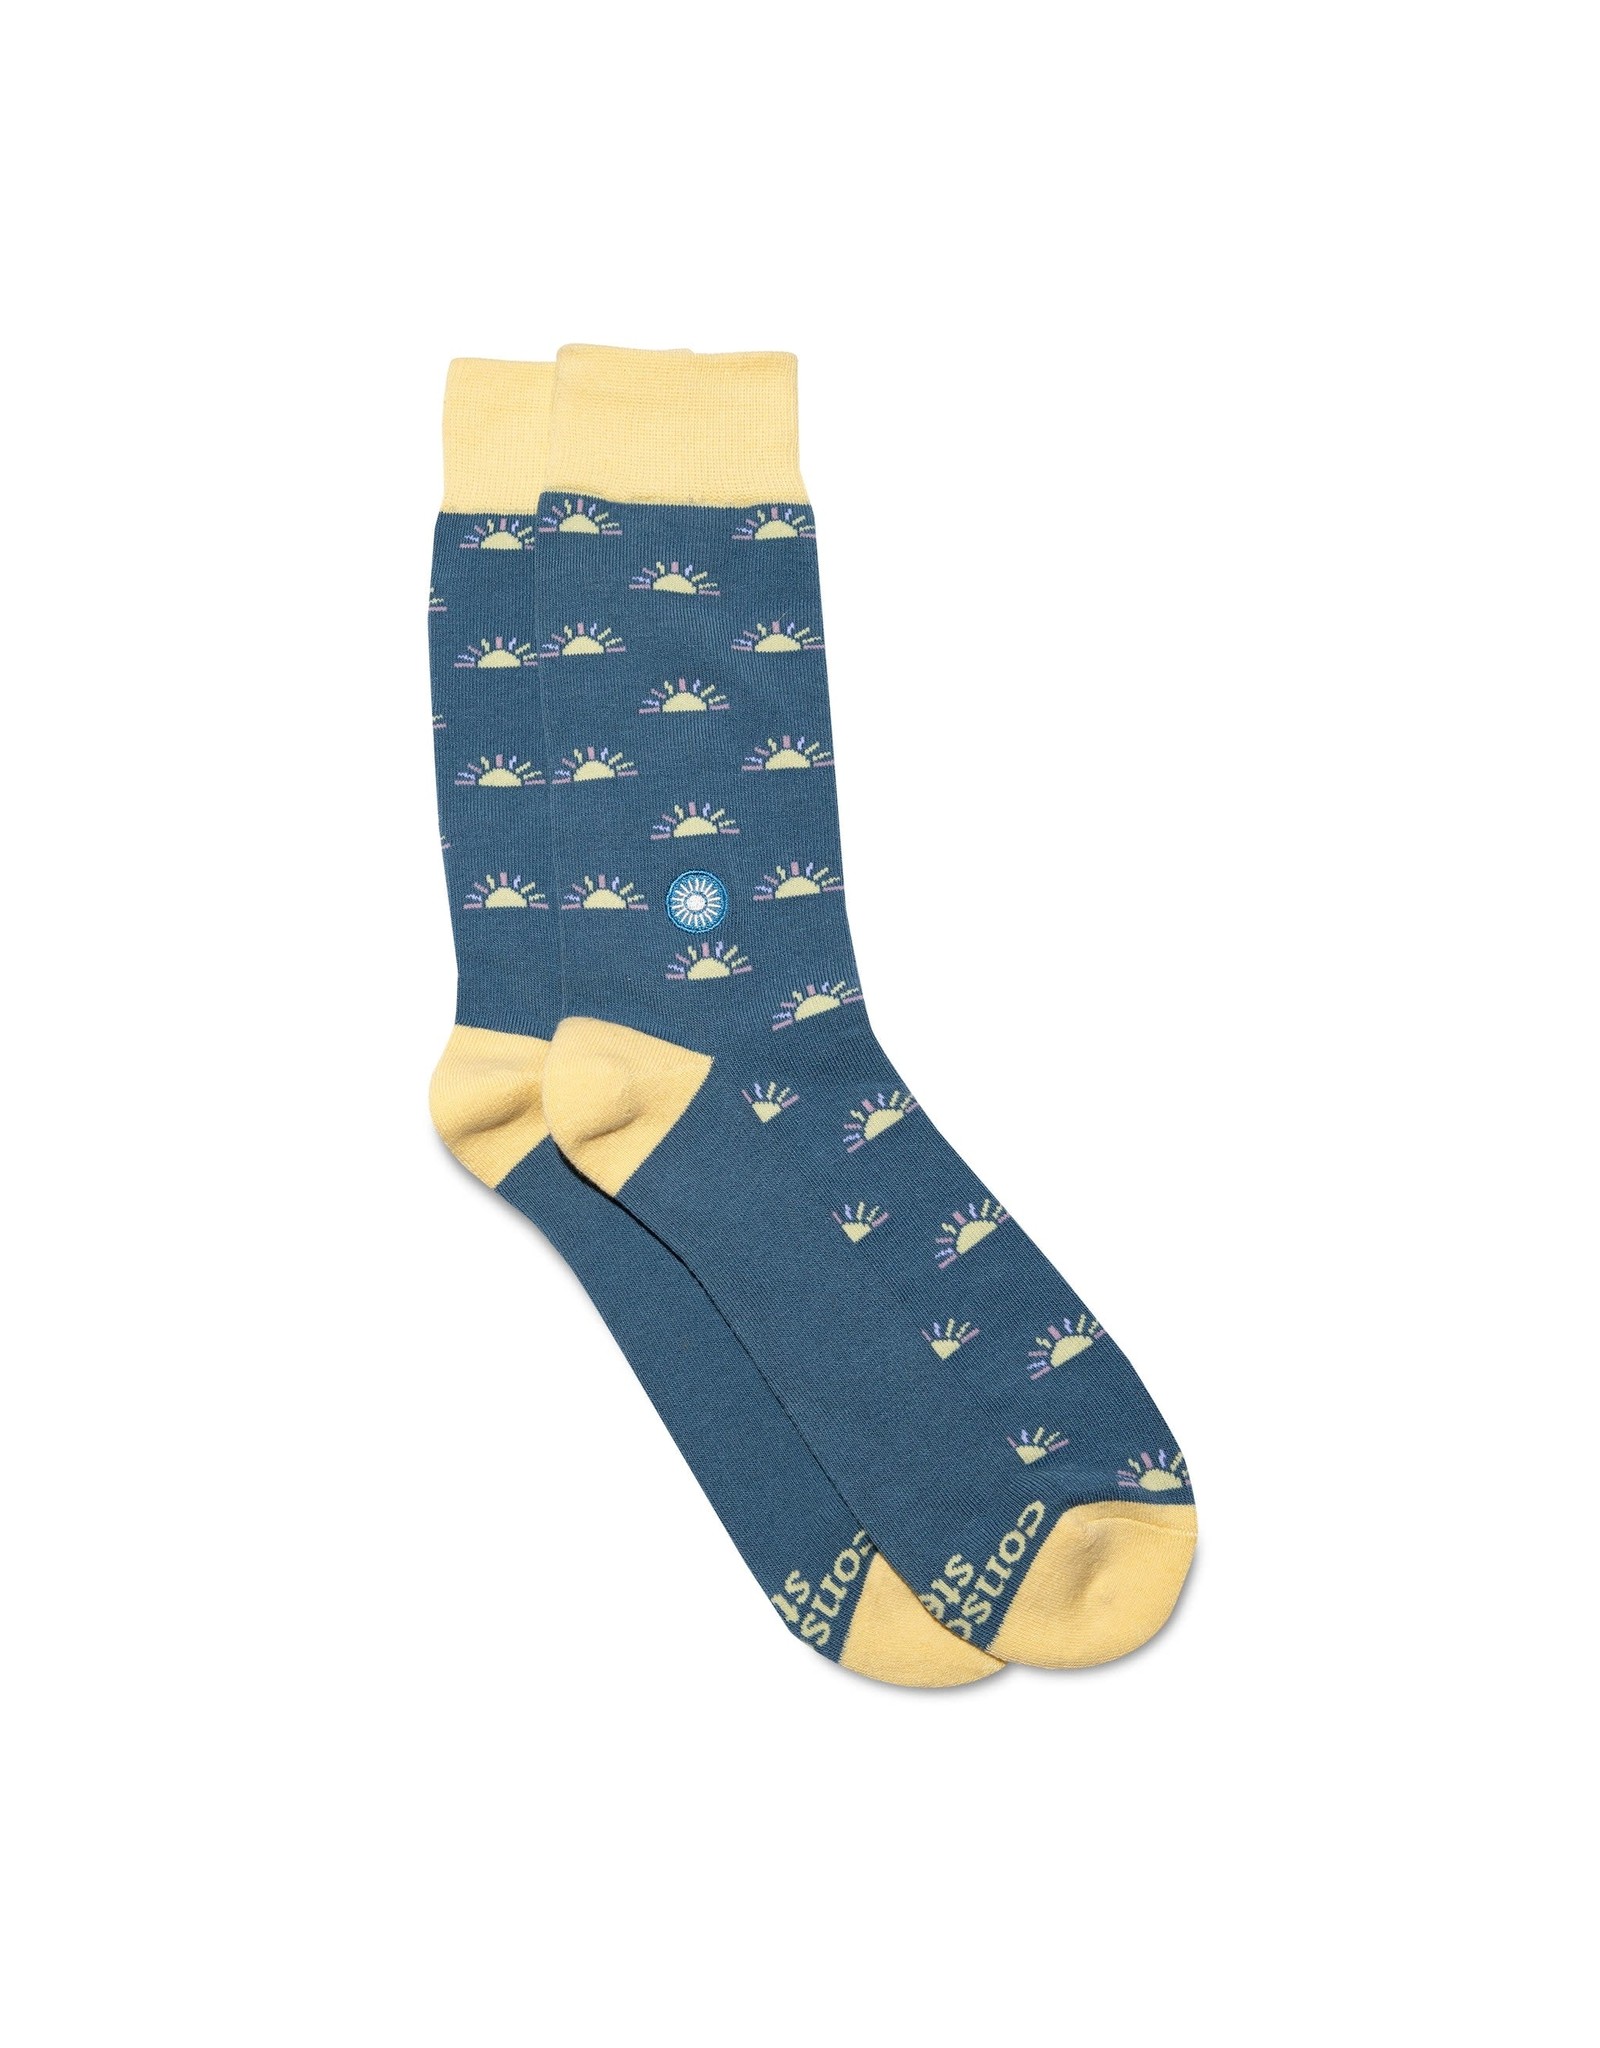 Trade roots Socks that Support Mental Health